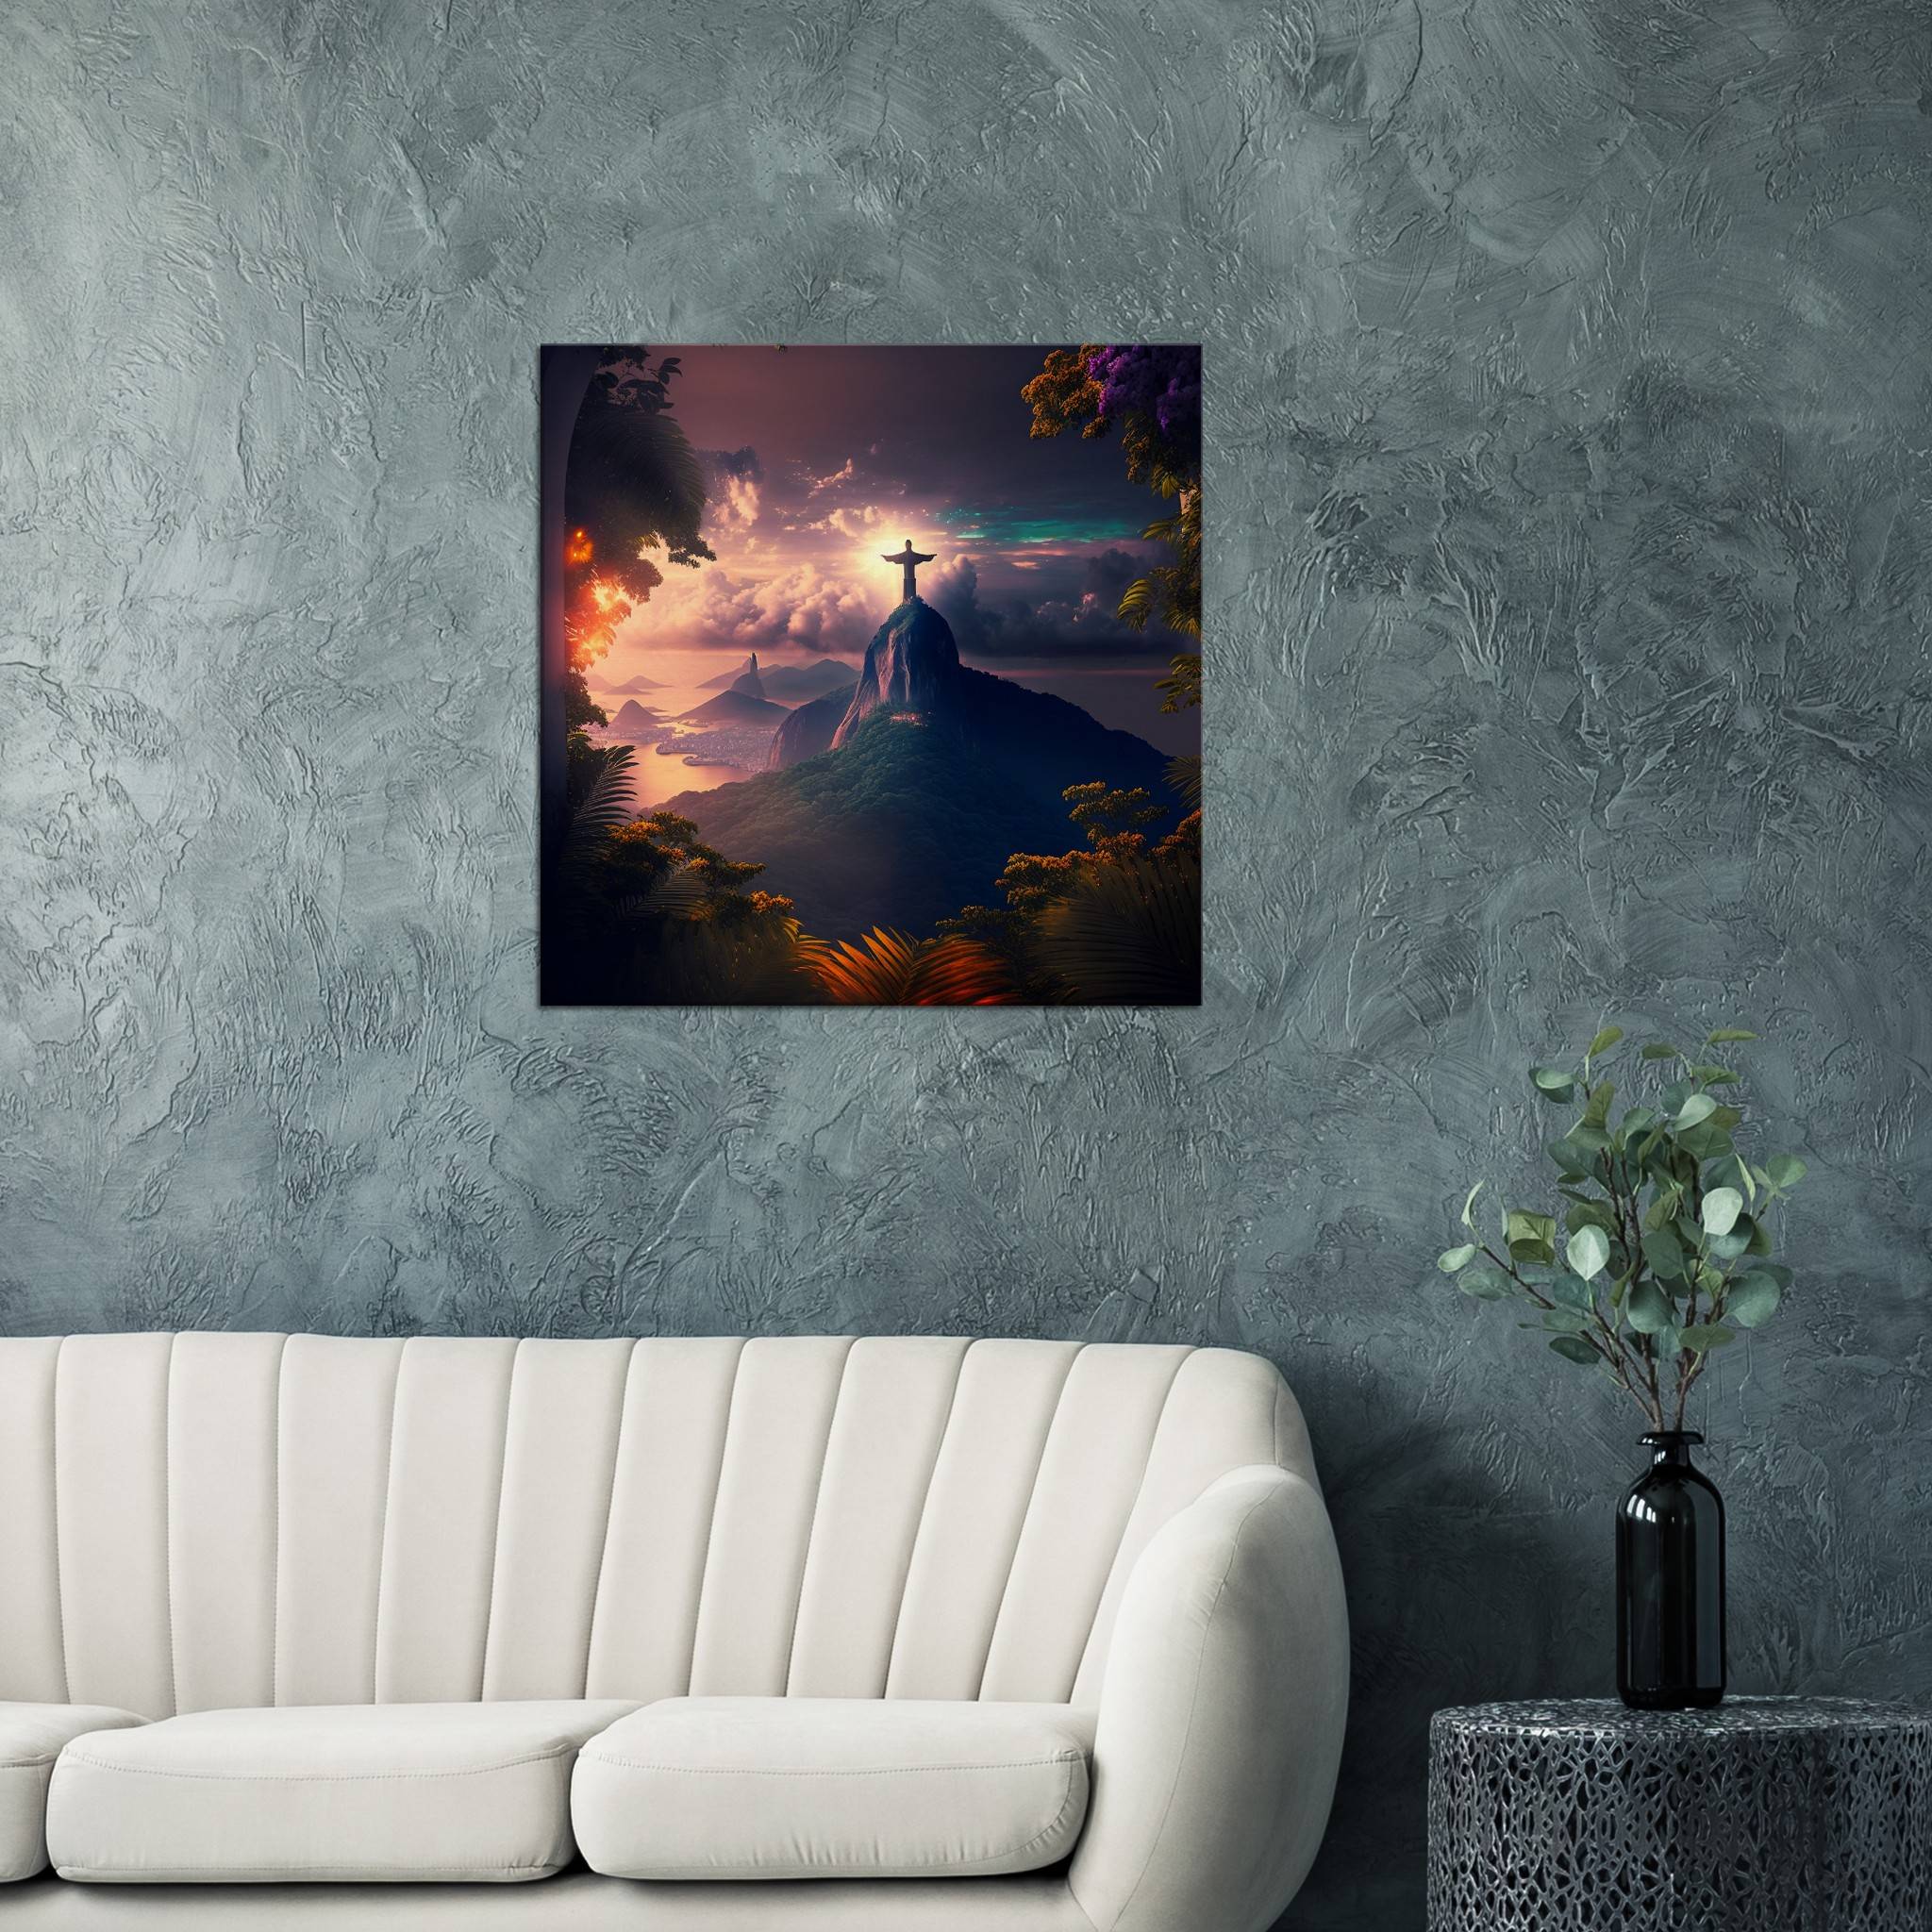 Christ the Redeemer 4 / 60 x 60cm (Canvas Print) Canvas Print Canvas reproduction The Pianist Print On Demand Fabled Gallery https://fabledgallery.art/product/christ-the-redeemer-4-60-x-60cm-canvas-print/